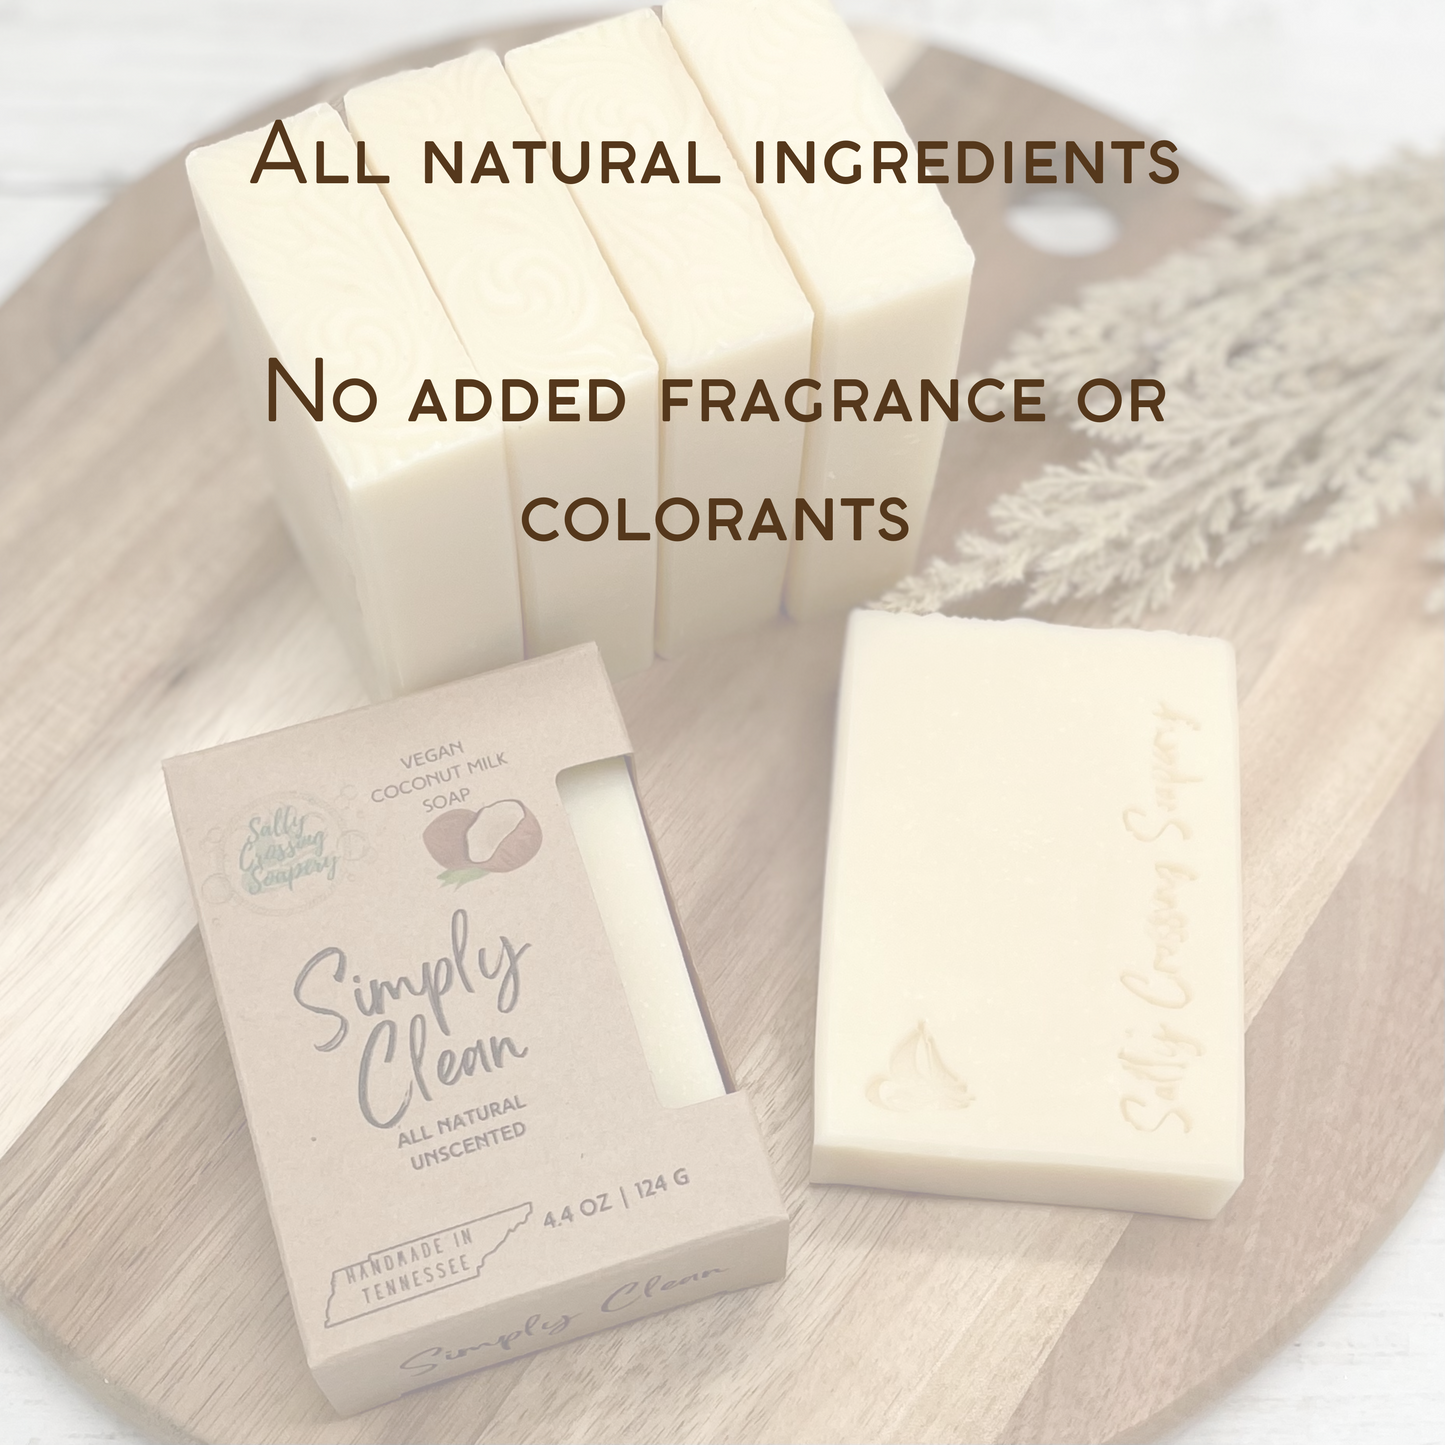 graphic. all natural ingredients. no added fragrance or colorants.